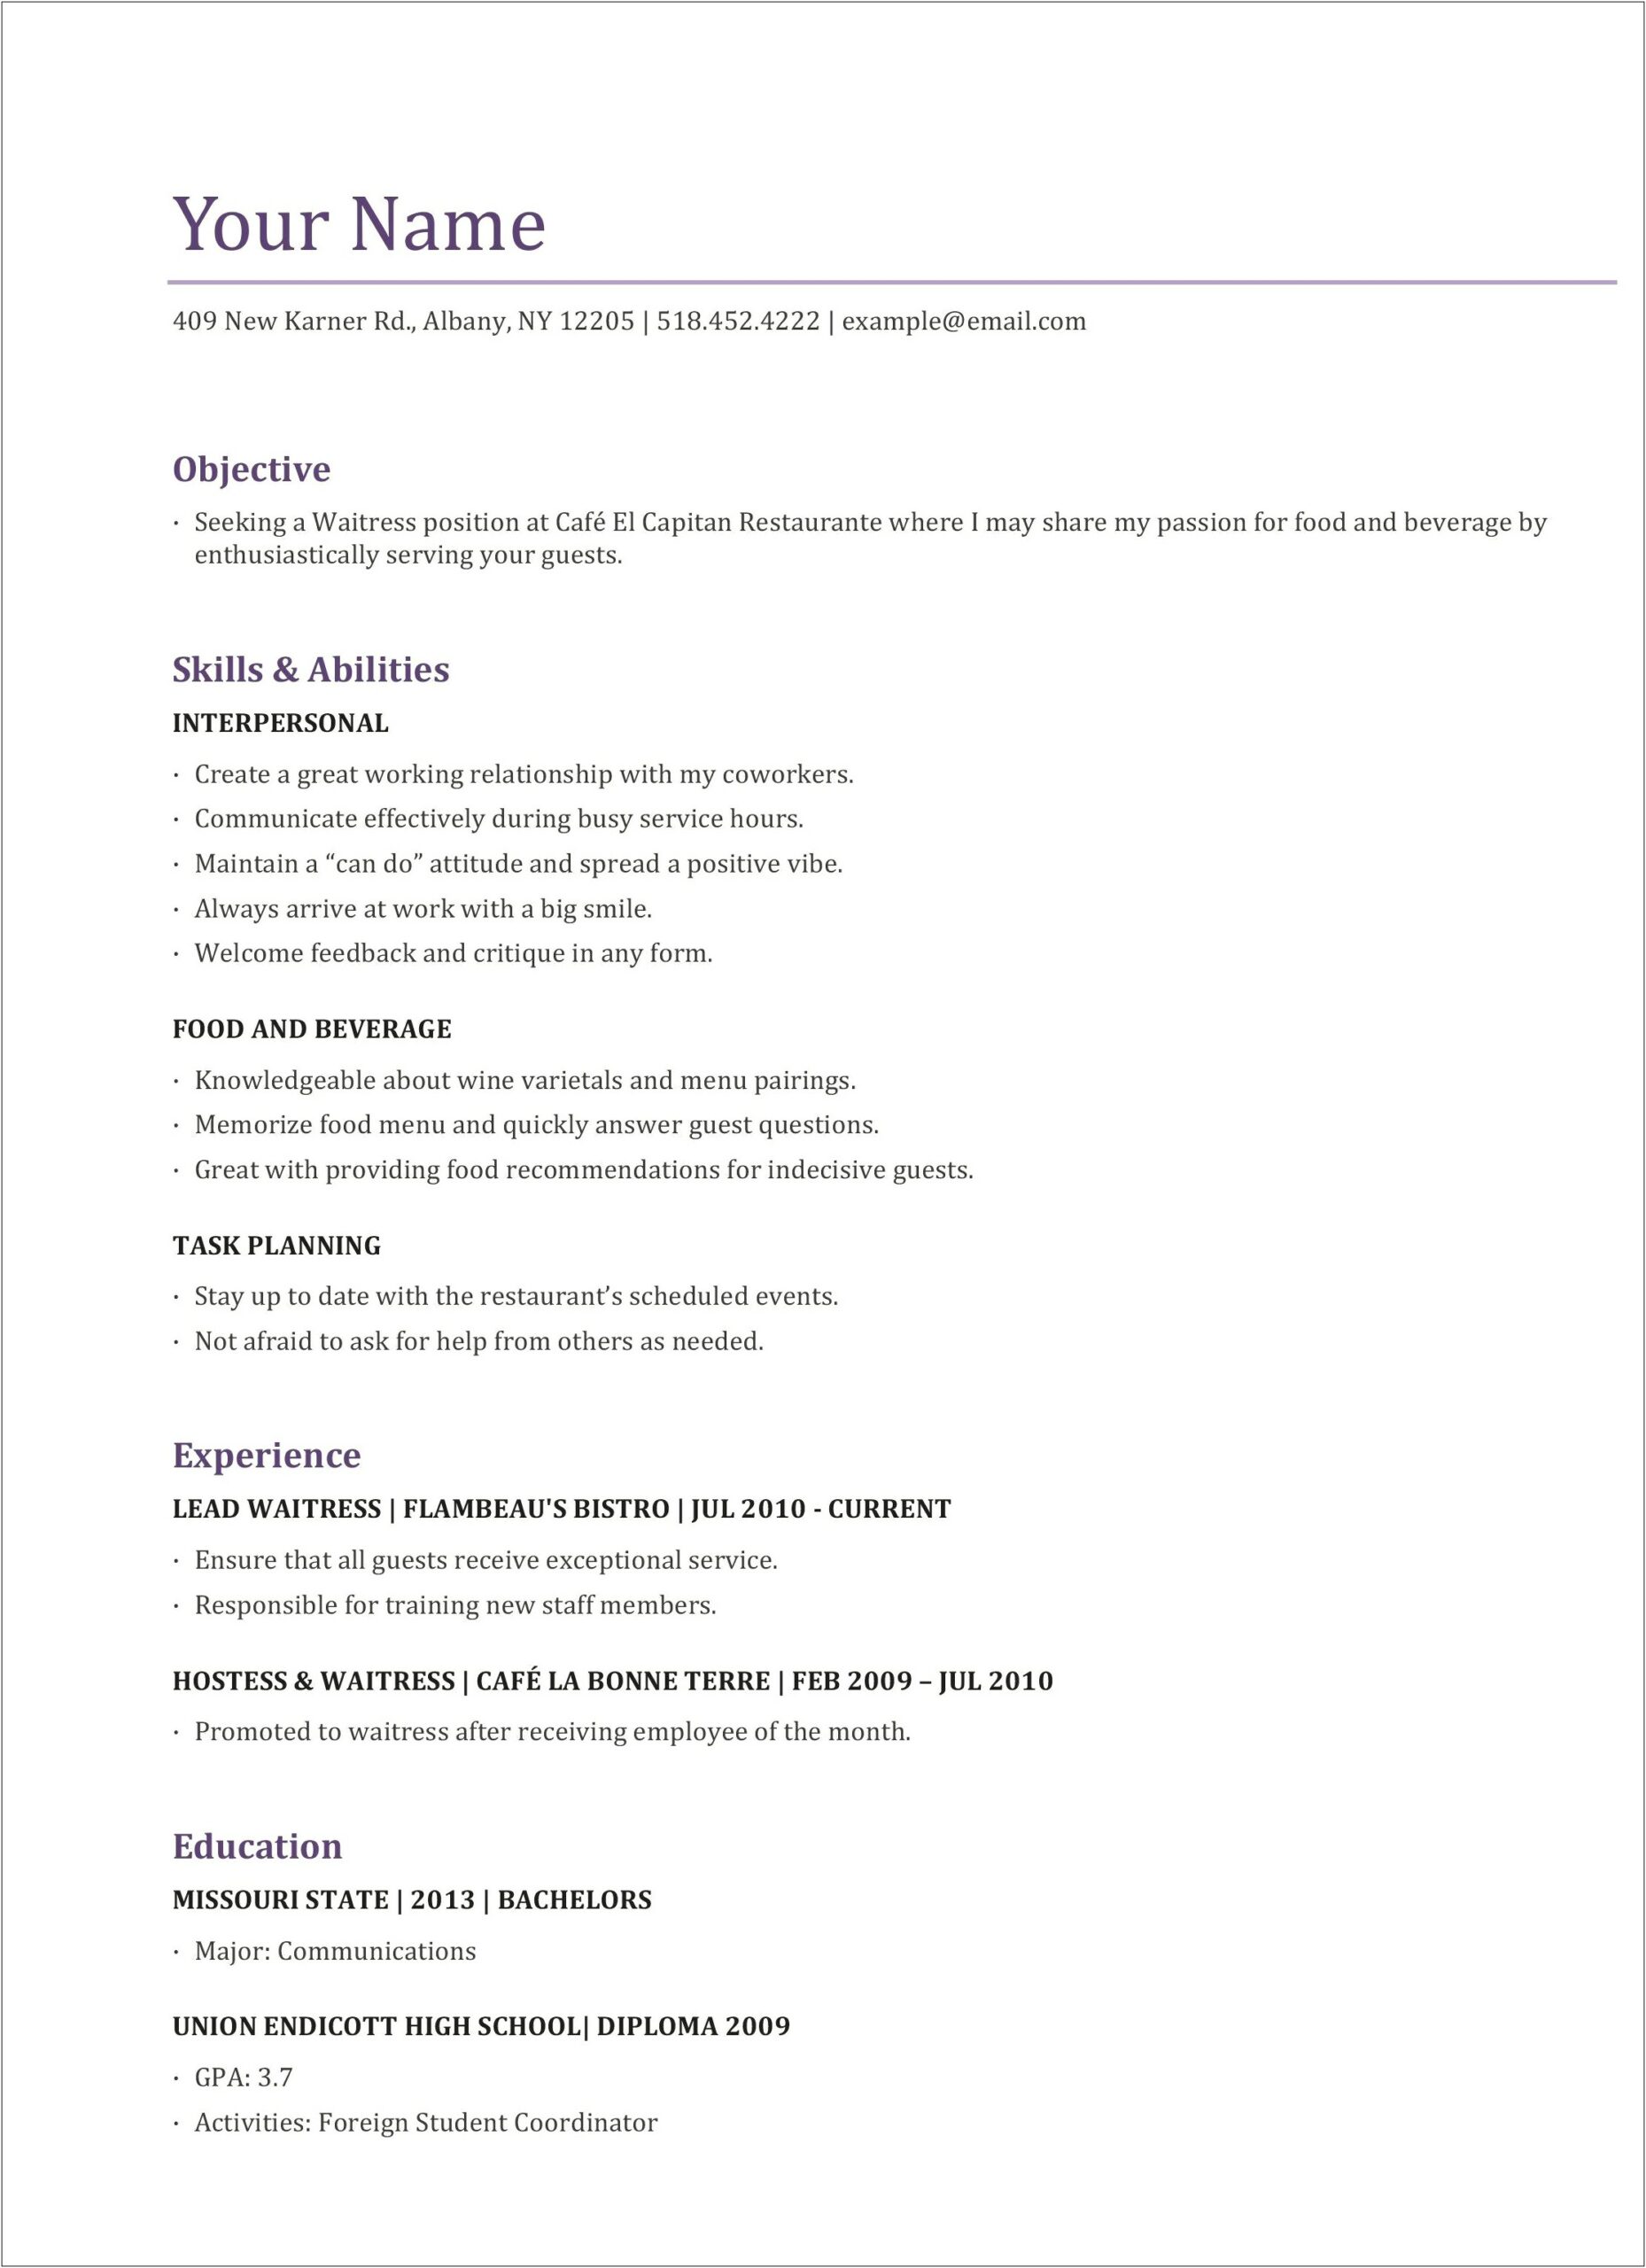 Objective Statement For Resume In Food Service